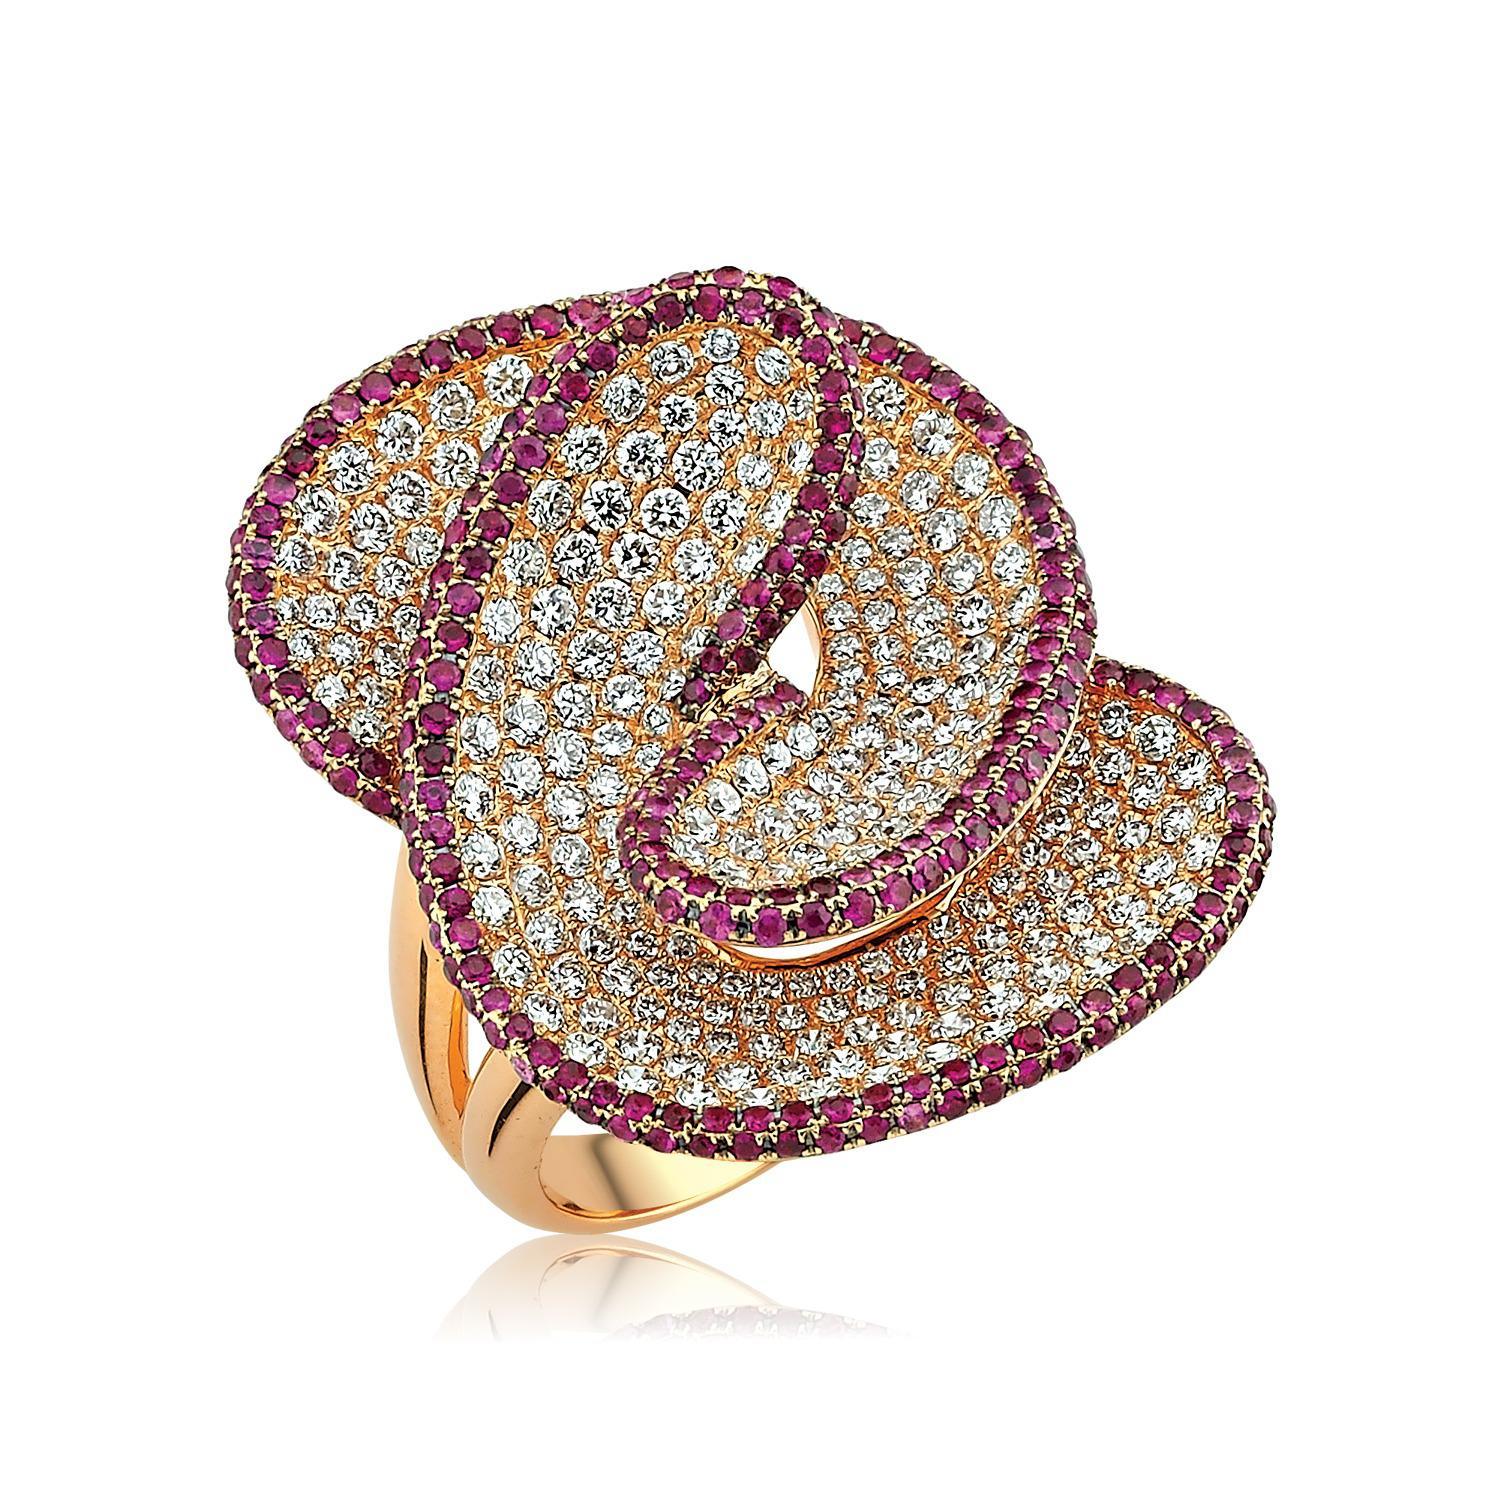 For Sale:  Connected 18k Gold Ring with White Diamonds and Rubies 3